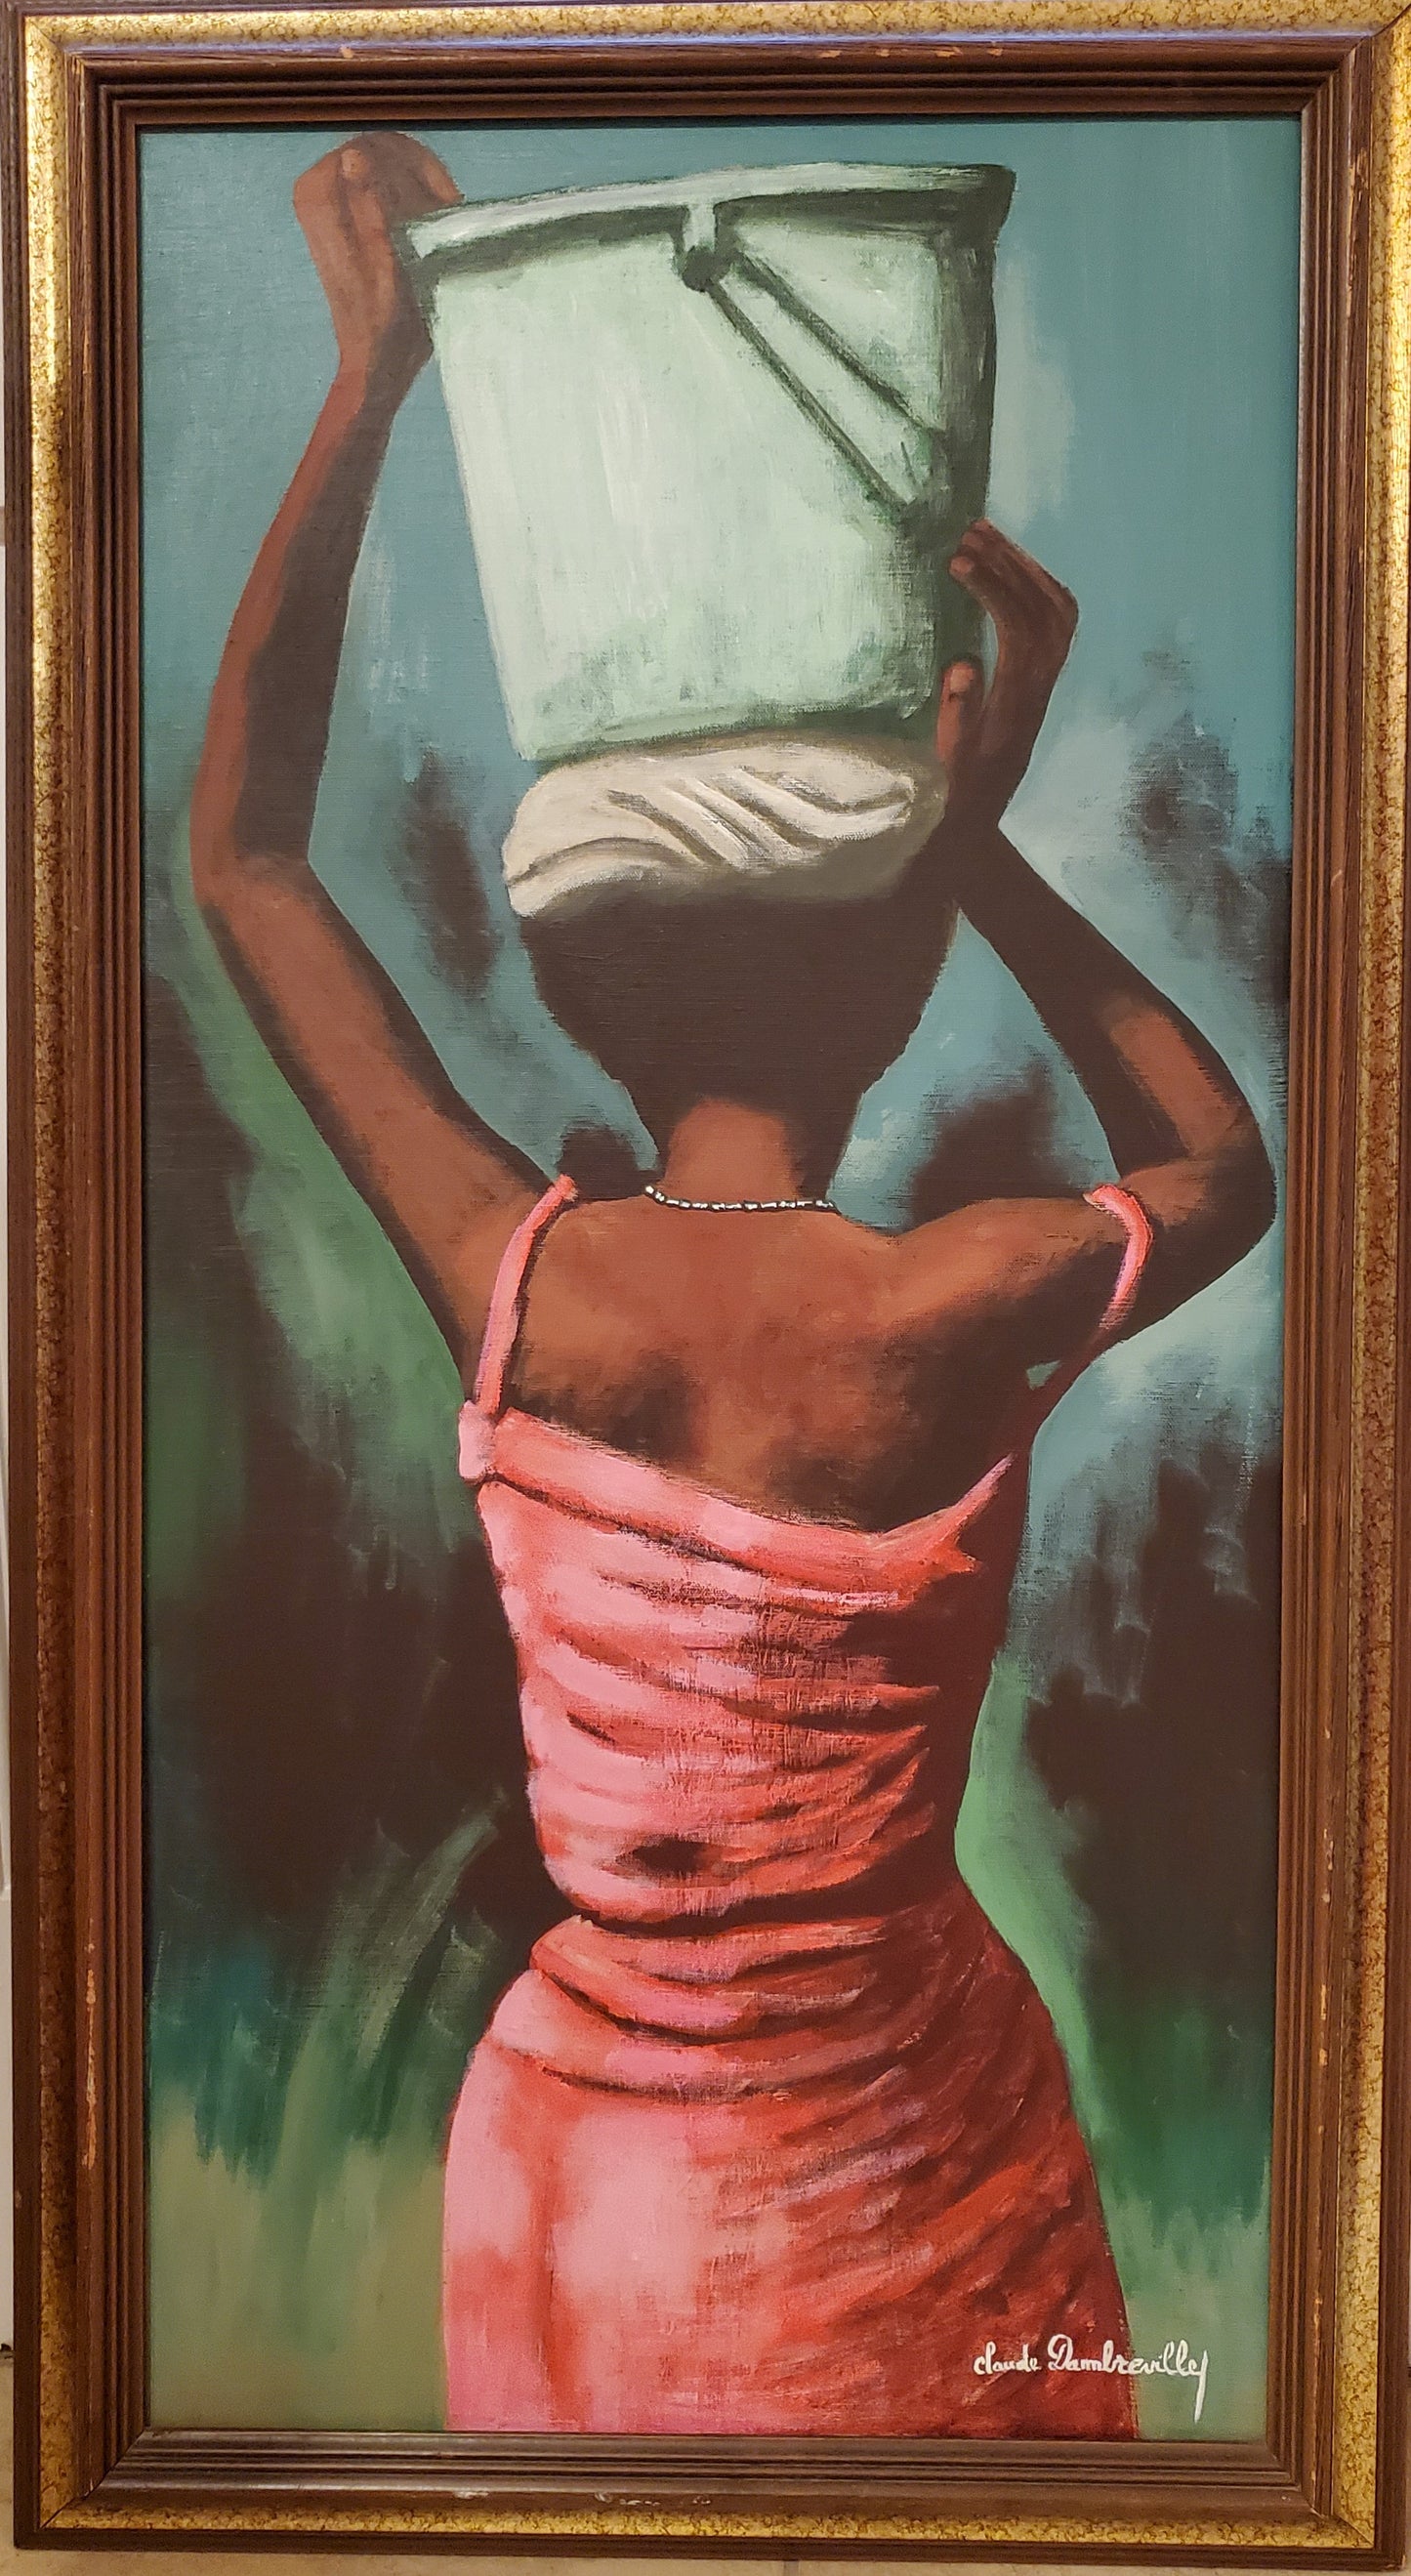 Claude Dambreville (1934-2021) 36"x18" Lady Carrying Bucket Of Water On Her Head c1990 Acrylic on Canvas #3MF